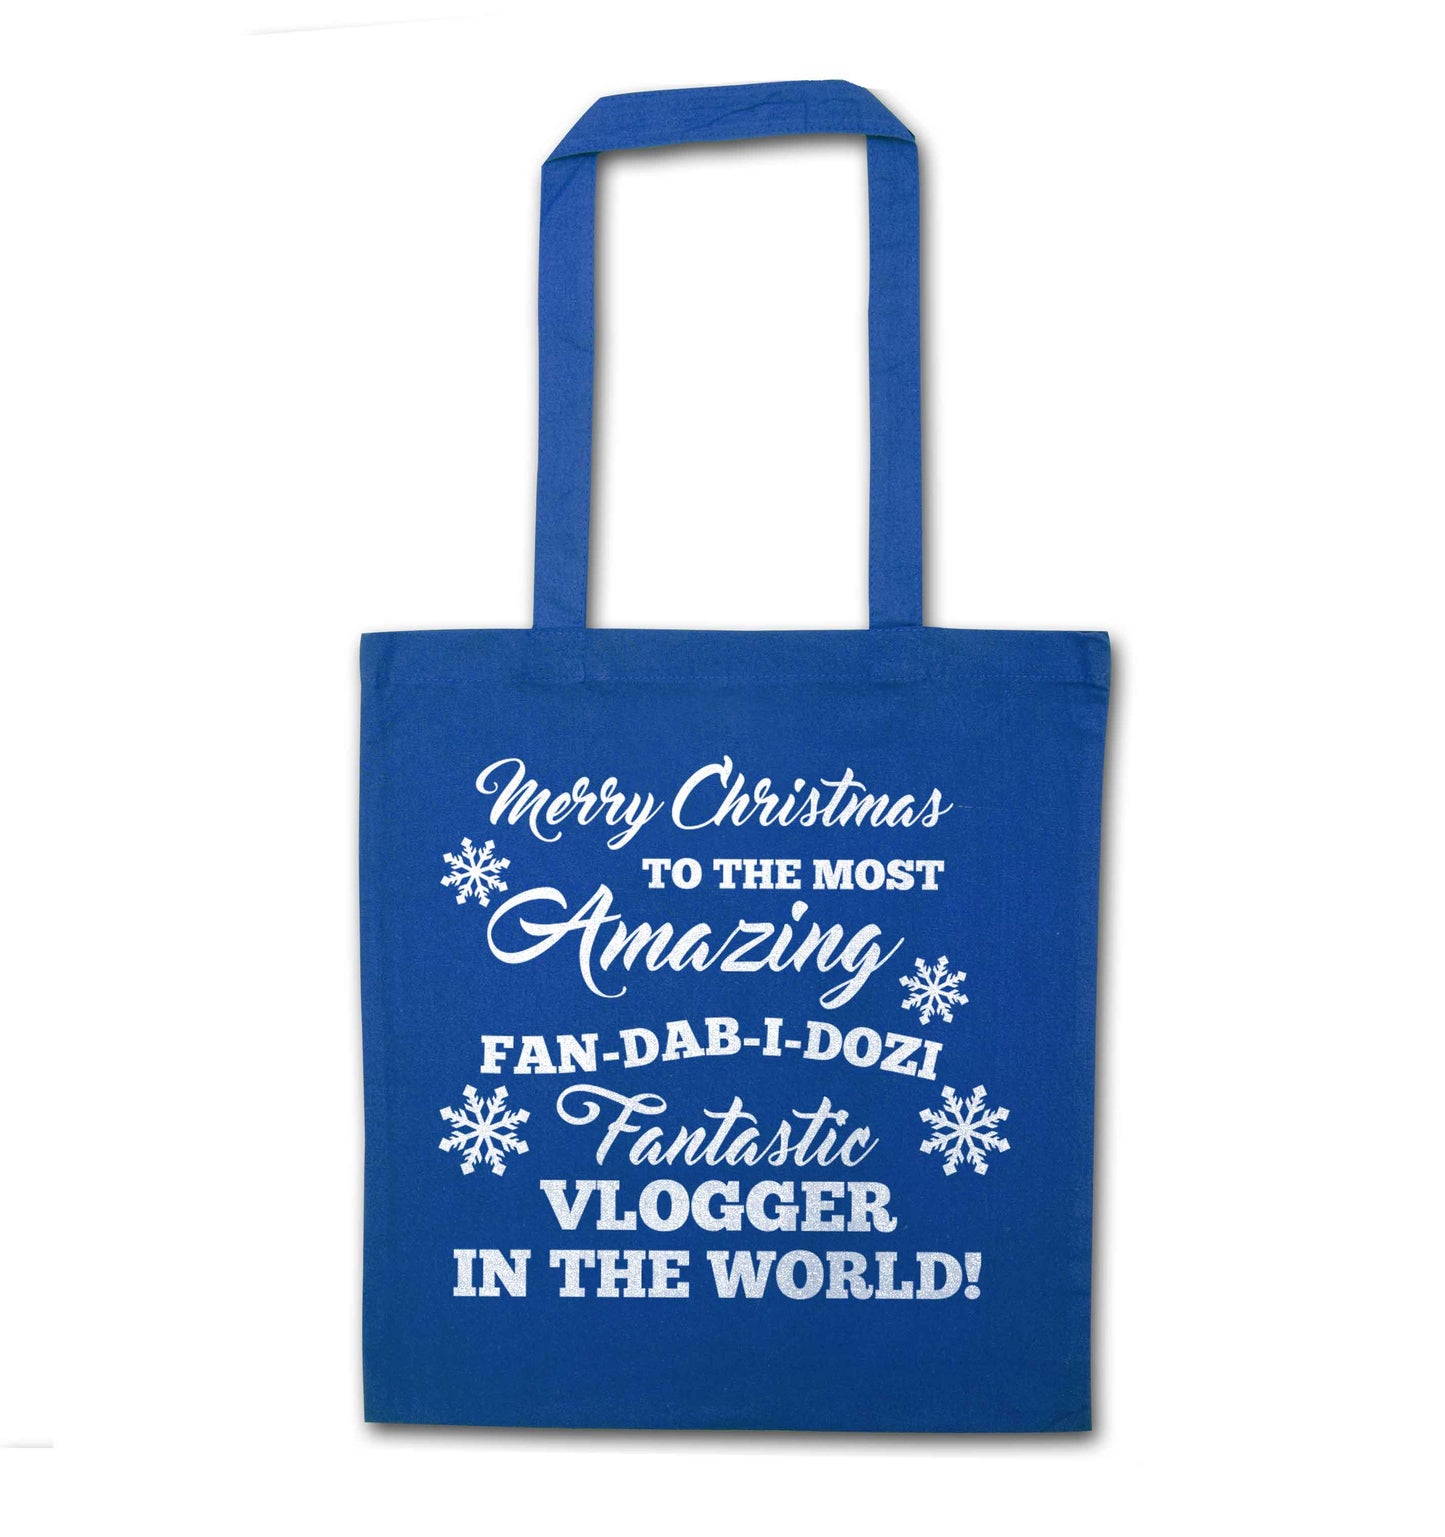 Merry Christmas to the most amazing fan-dab-i-dozi fantasic vlogger in the world blue tote bag